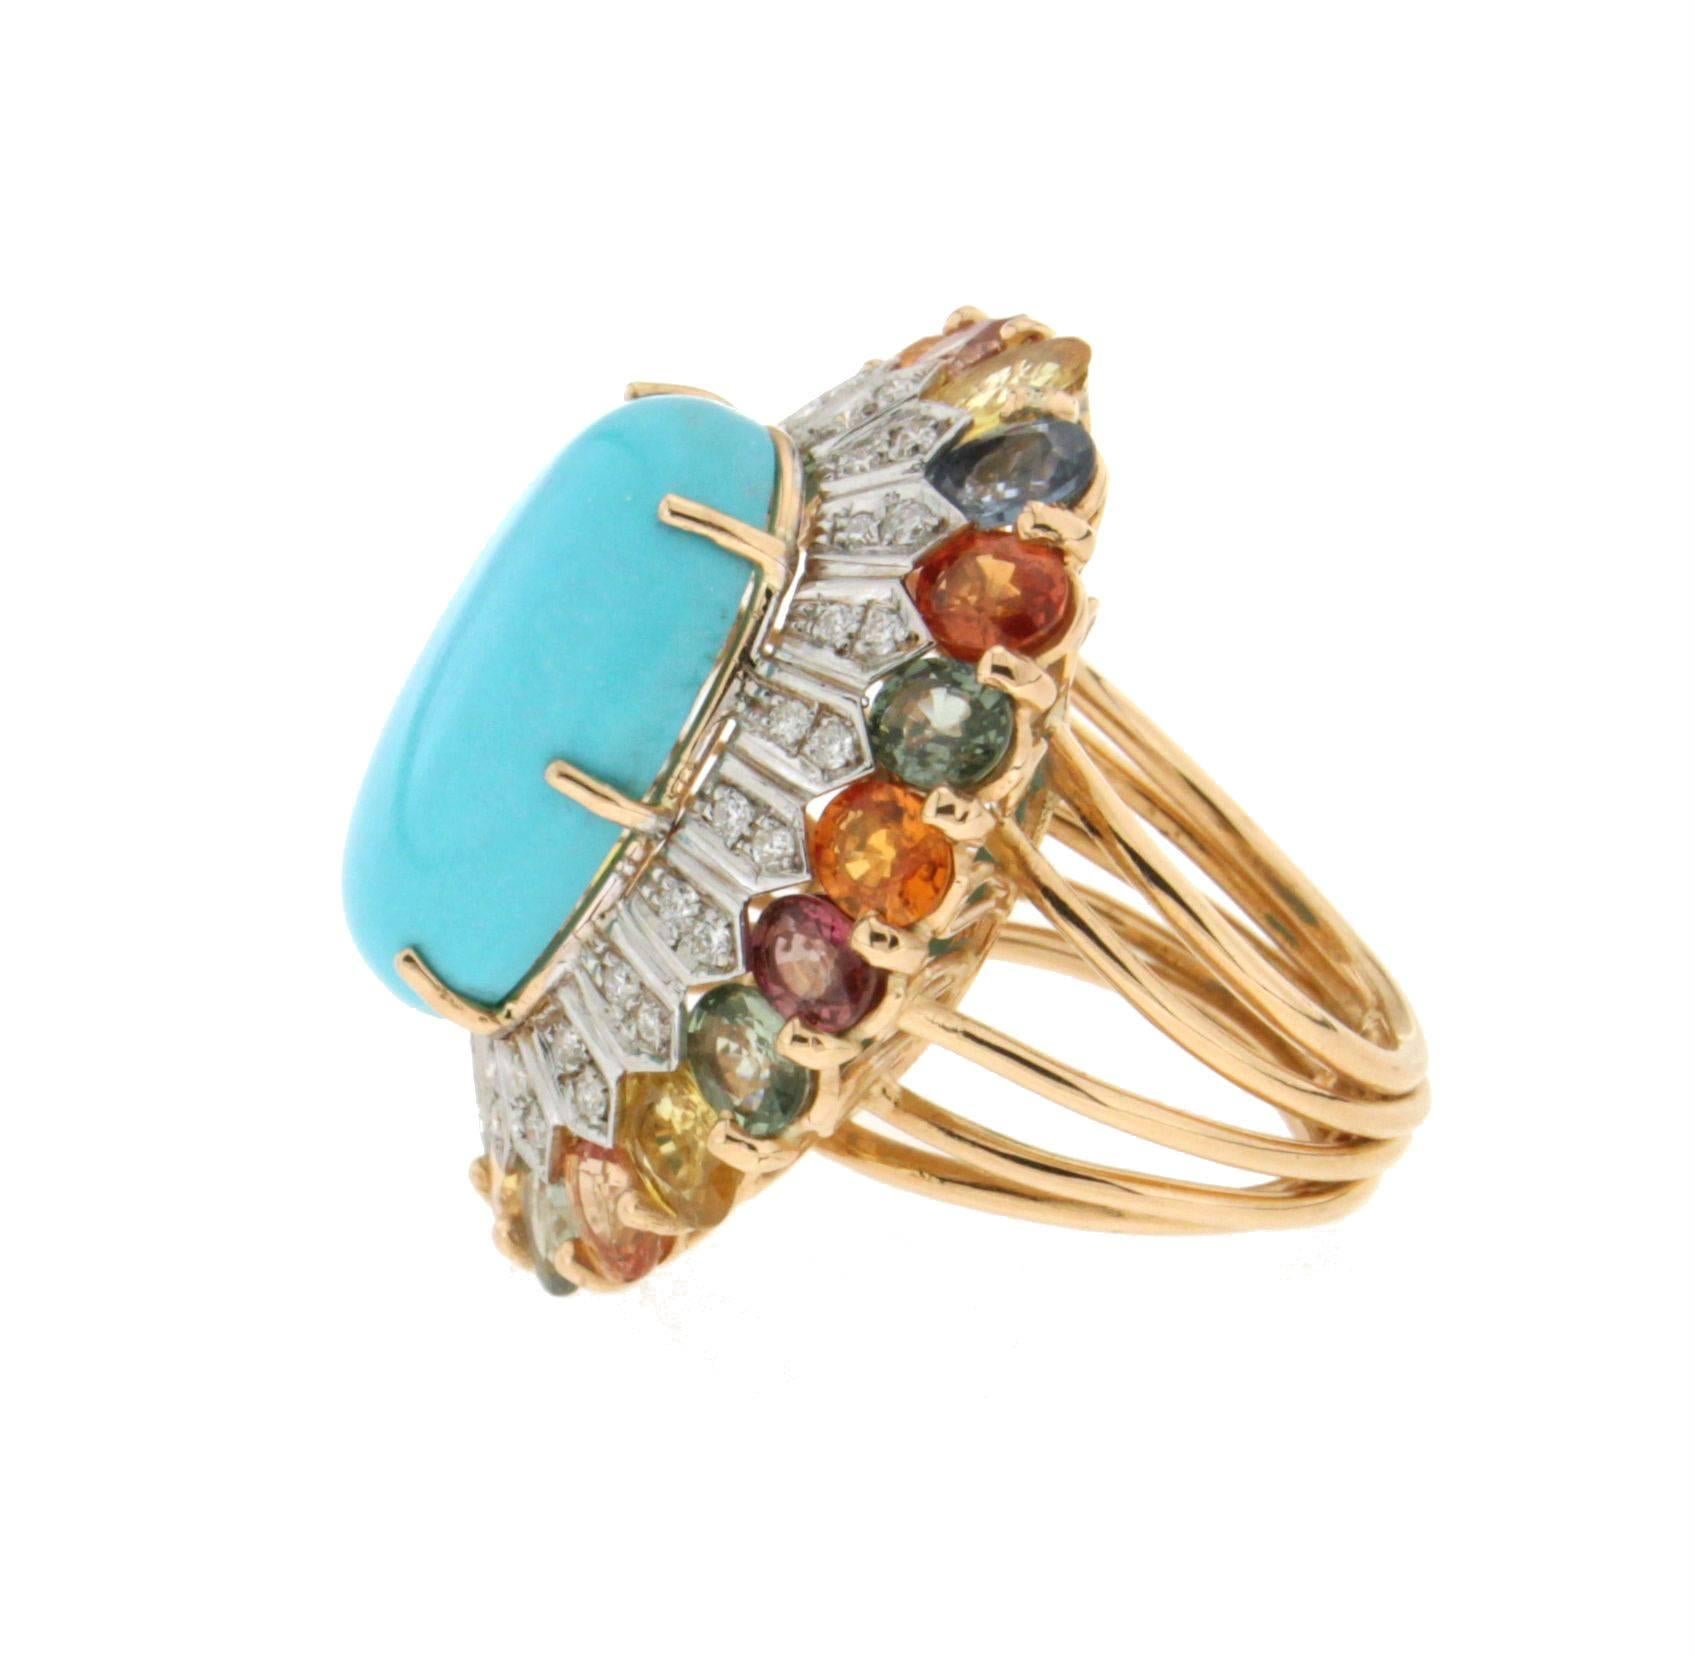 Turquoise, 18 Karat White and Yellow Gold, Diamonds, Sapphires, Cocktail Ring 2